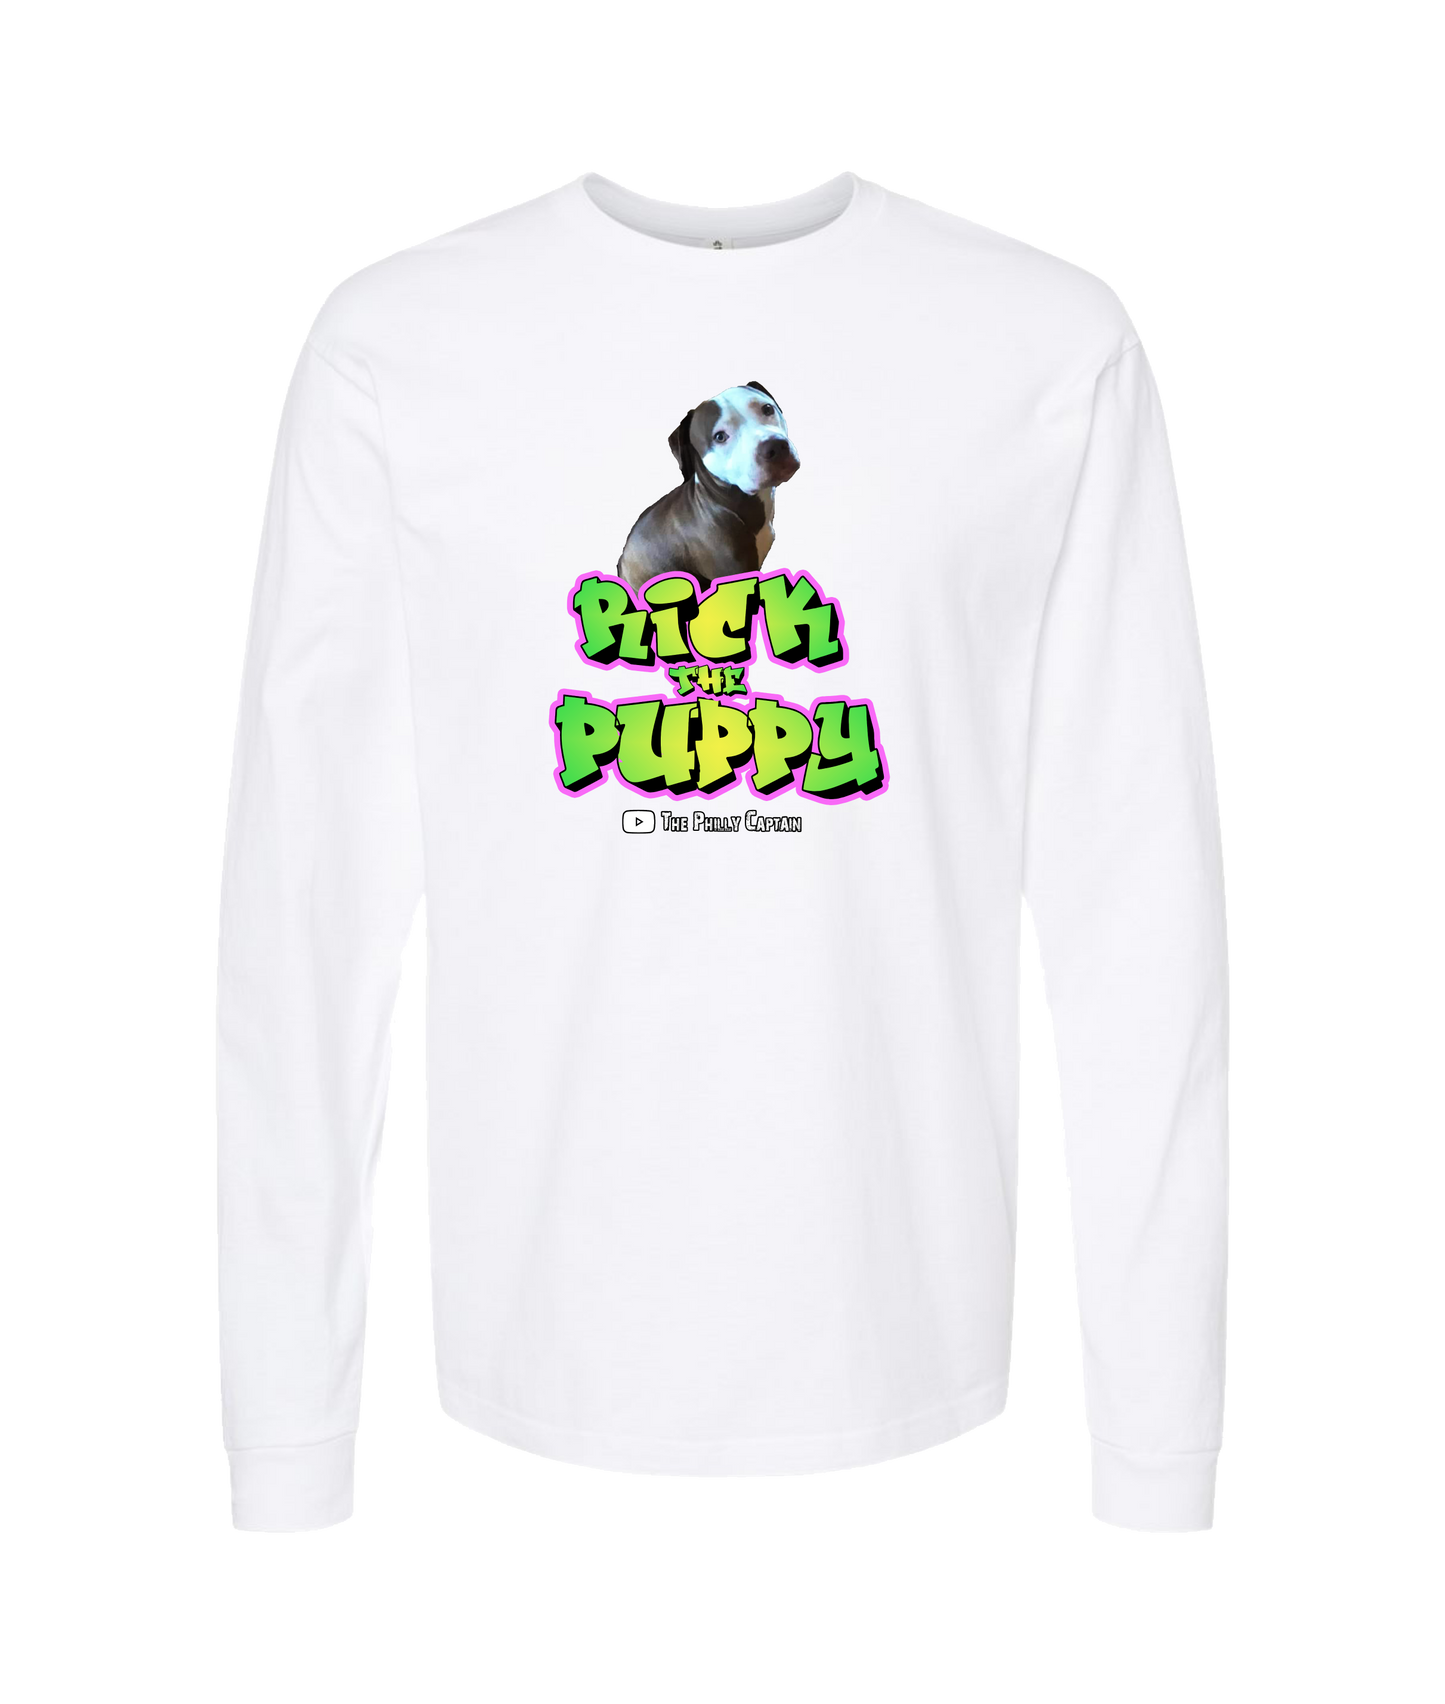 The Philly Captain's Merch is Fire - Rick the Puppy - White Long Sleeve T